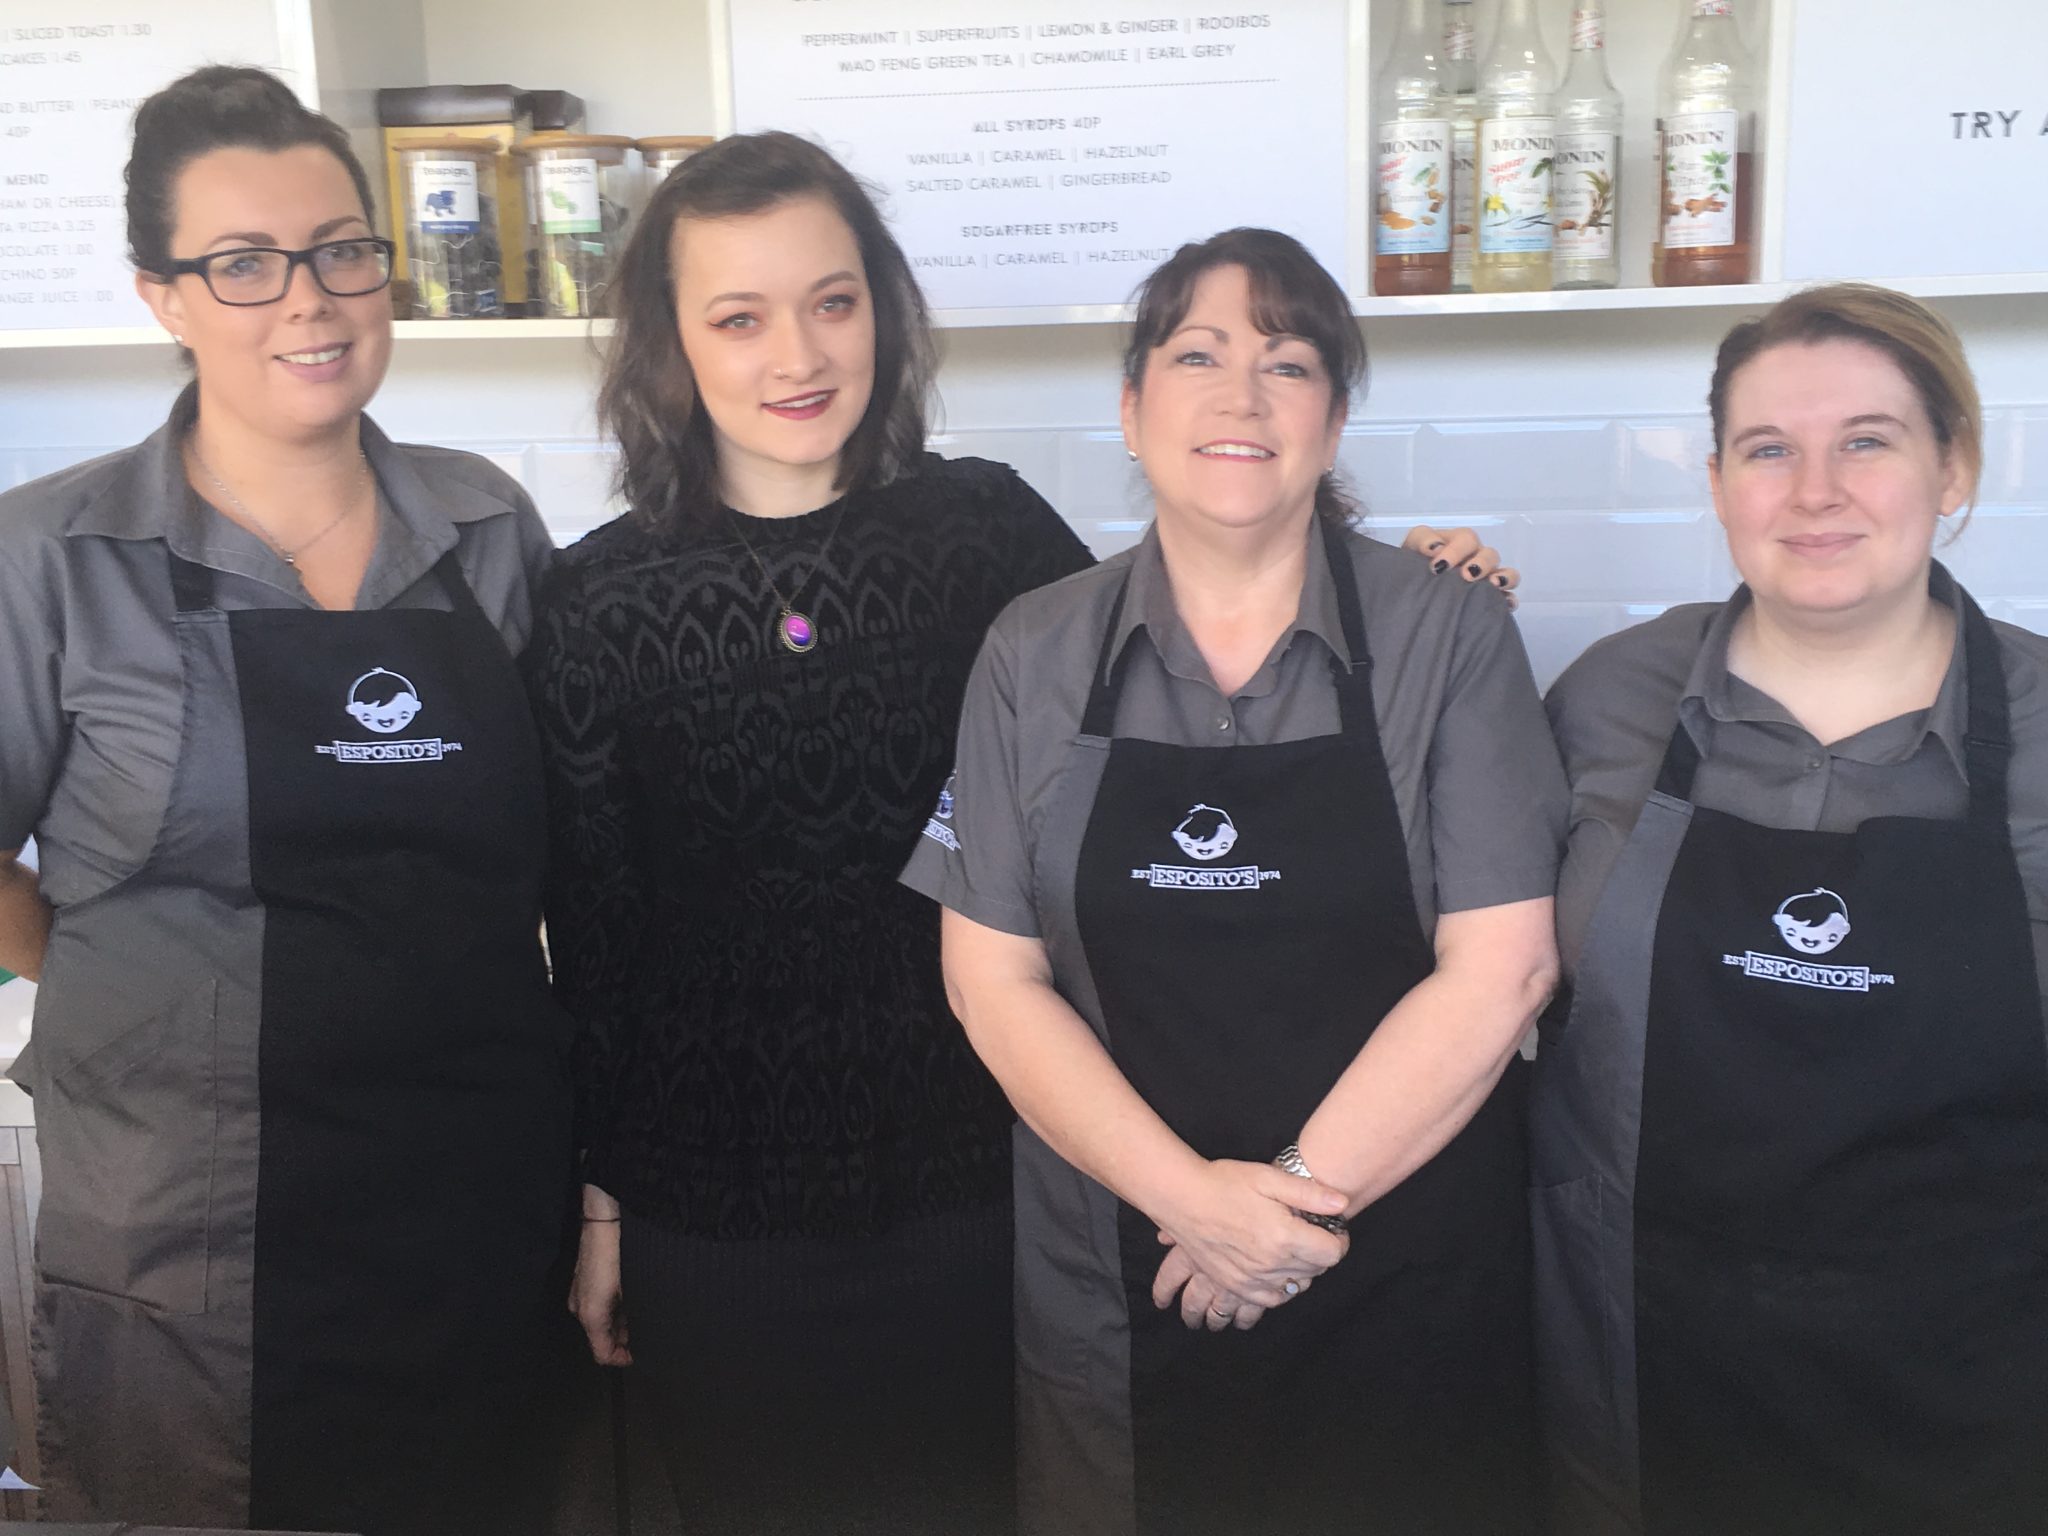 Mamma Mia! Victoria Park coffee shop now re-open after £110k facelift